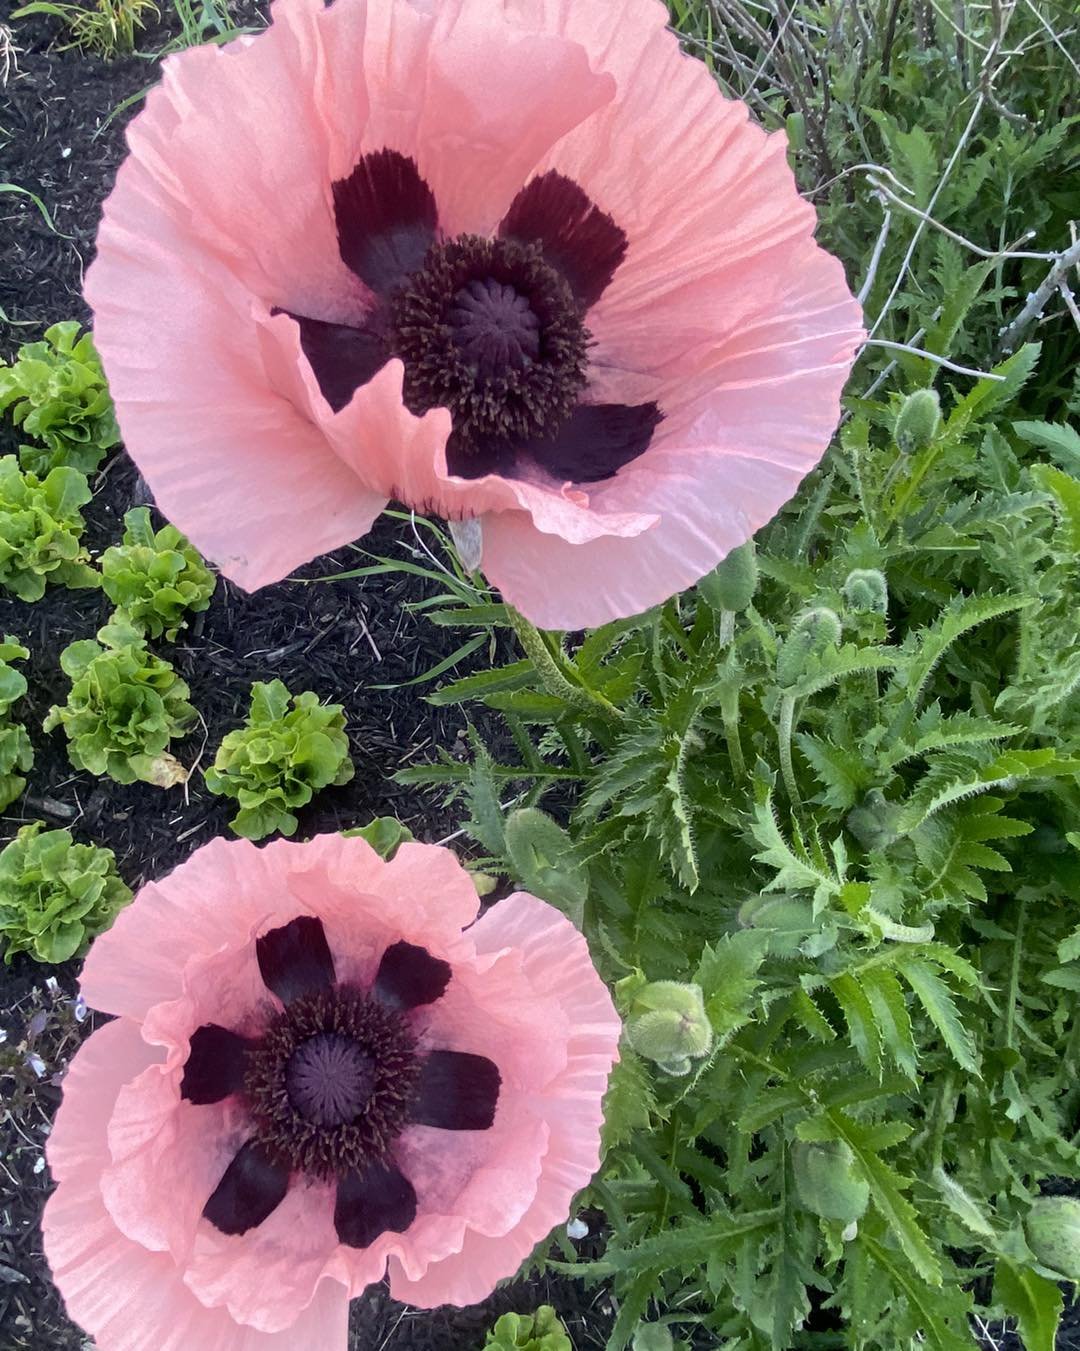 Wayne County Home &amp; Garden Show 

If you drive by our farm in Spring and love the poppies by our mailbox, we have them for sale today at the Home &amp; Garden Show. 

#waynecountyhomeandgardenshow